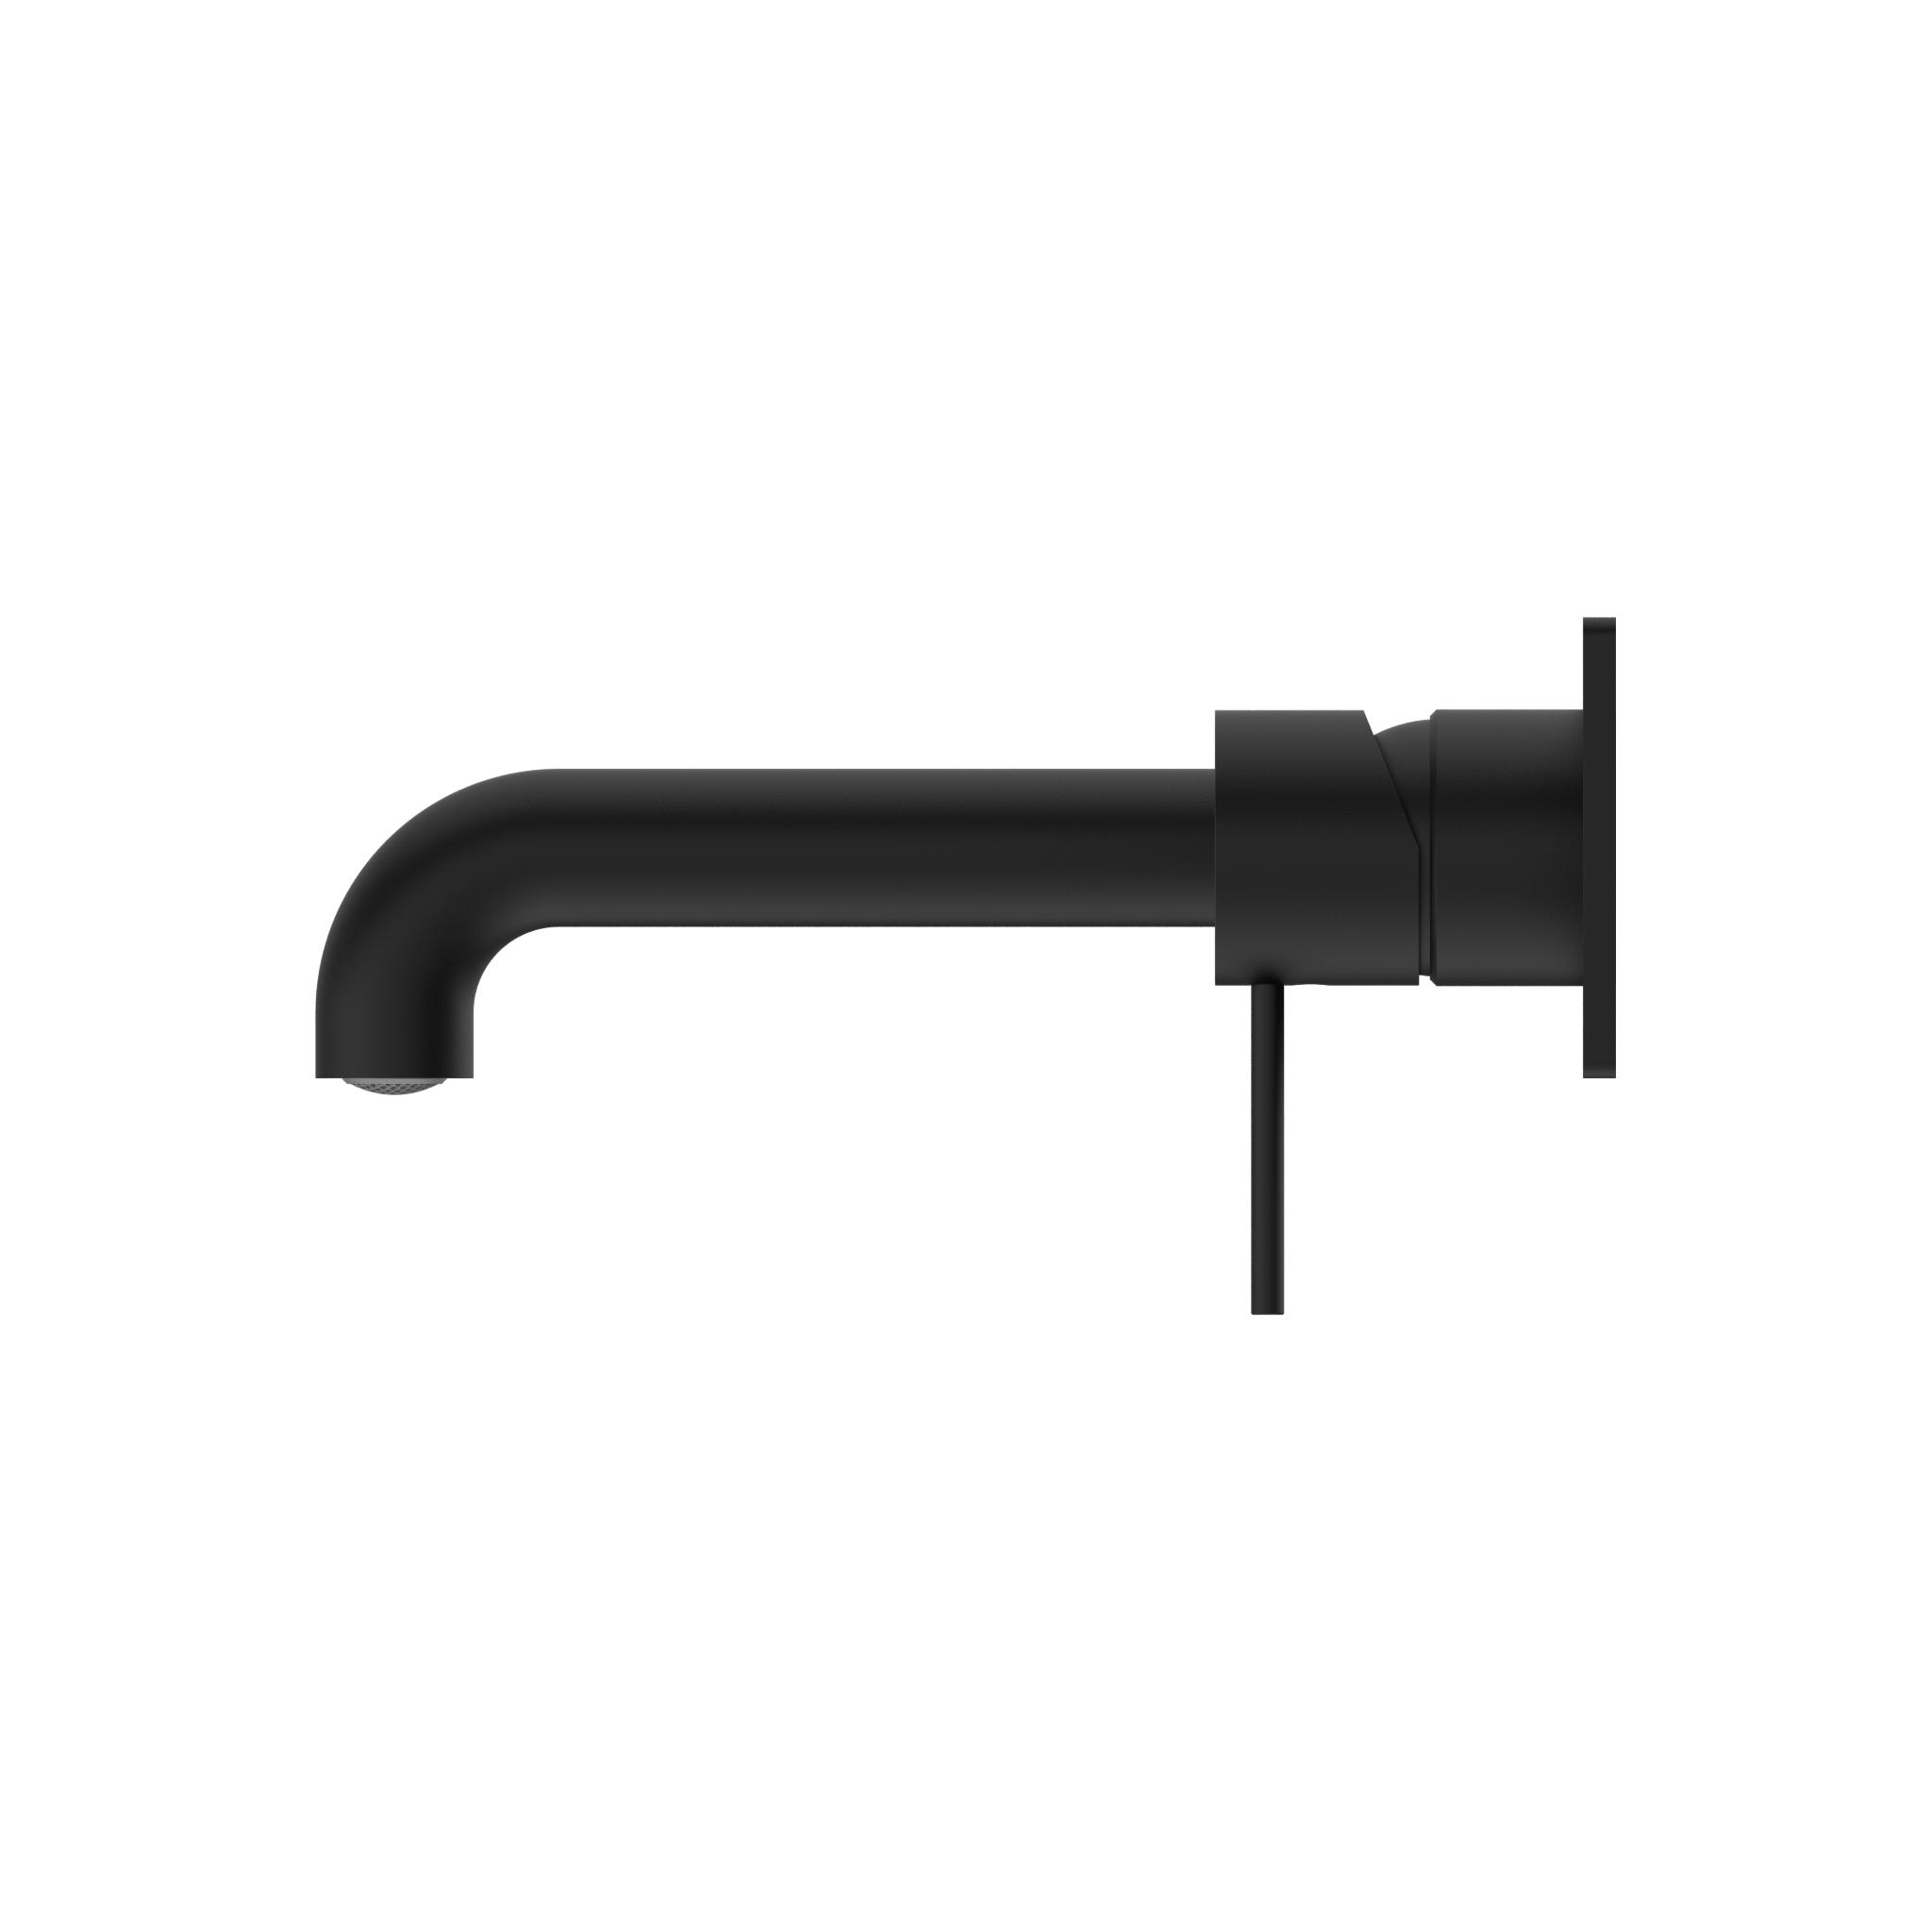 NERO MECCA WALL BASIN/ BATH MIXER MATTE BLACK (AVAILABLE IN 120MM, 160MM, 185MM, 230MM AND 260MM)